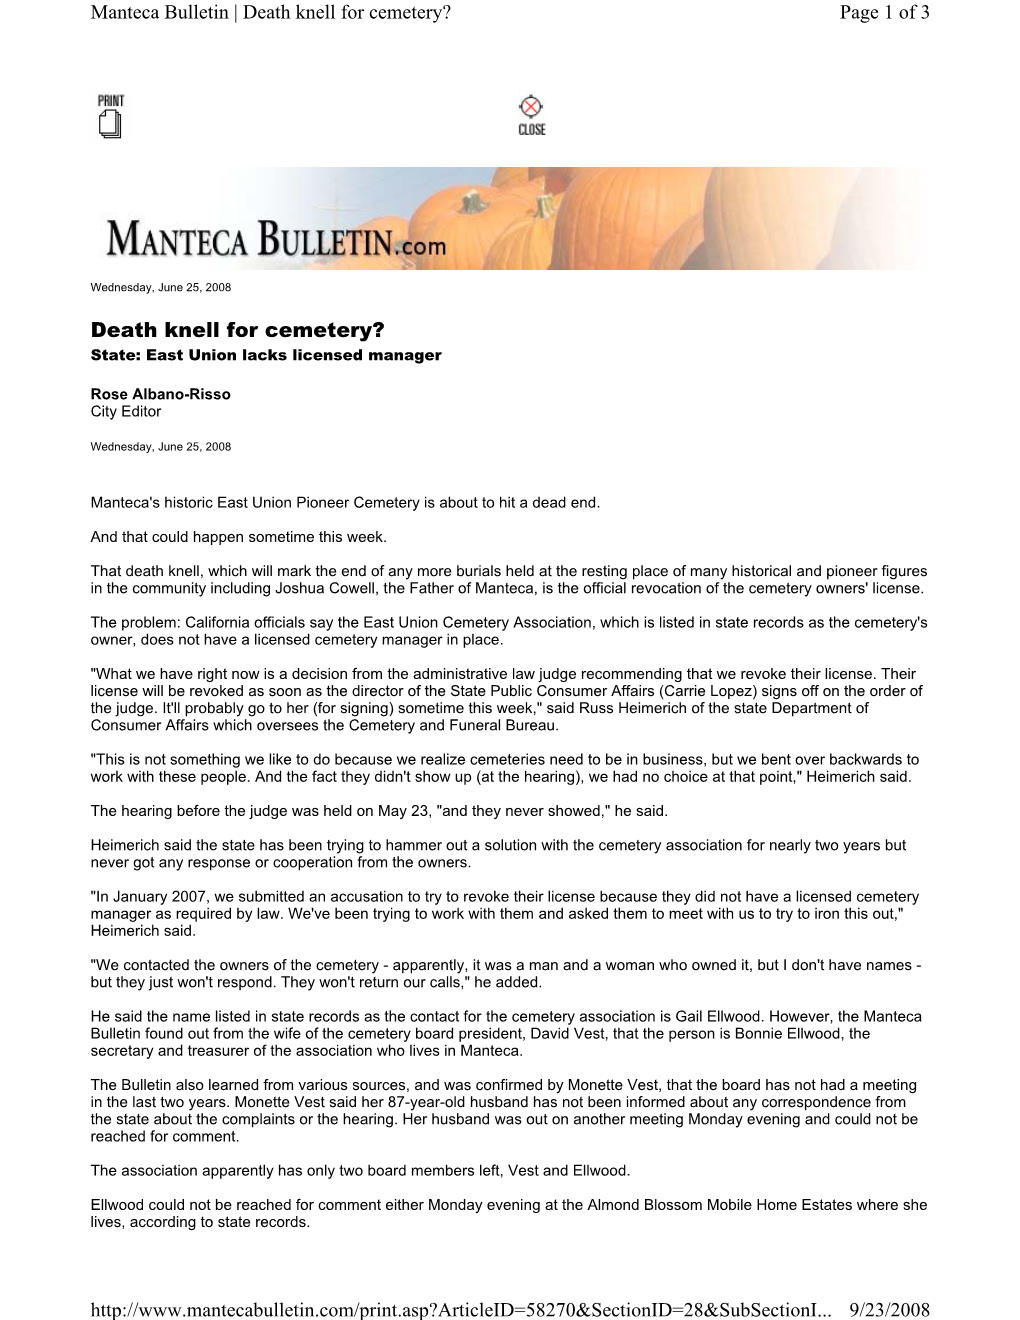 Death Knell for Cemetery? Page 1 of 3 Manteca Bulletin | Death Knell